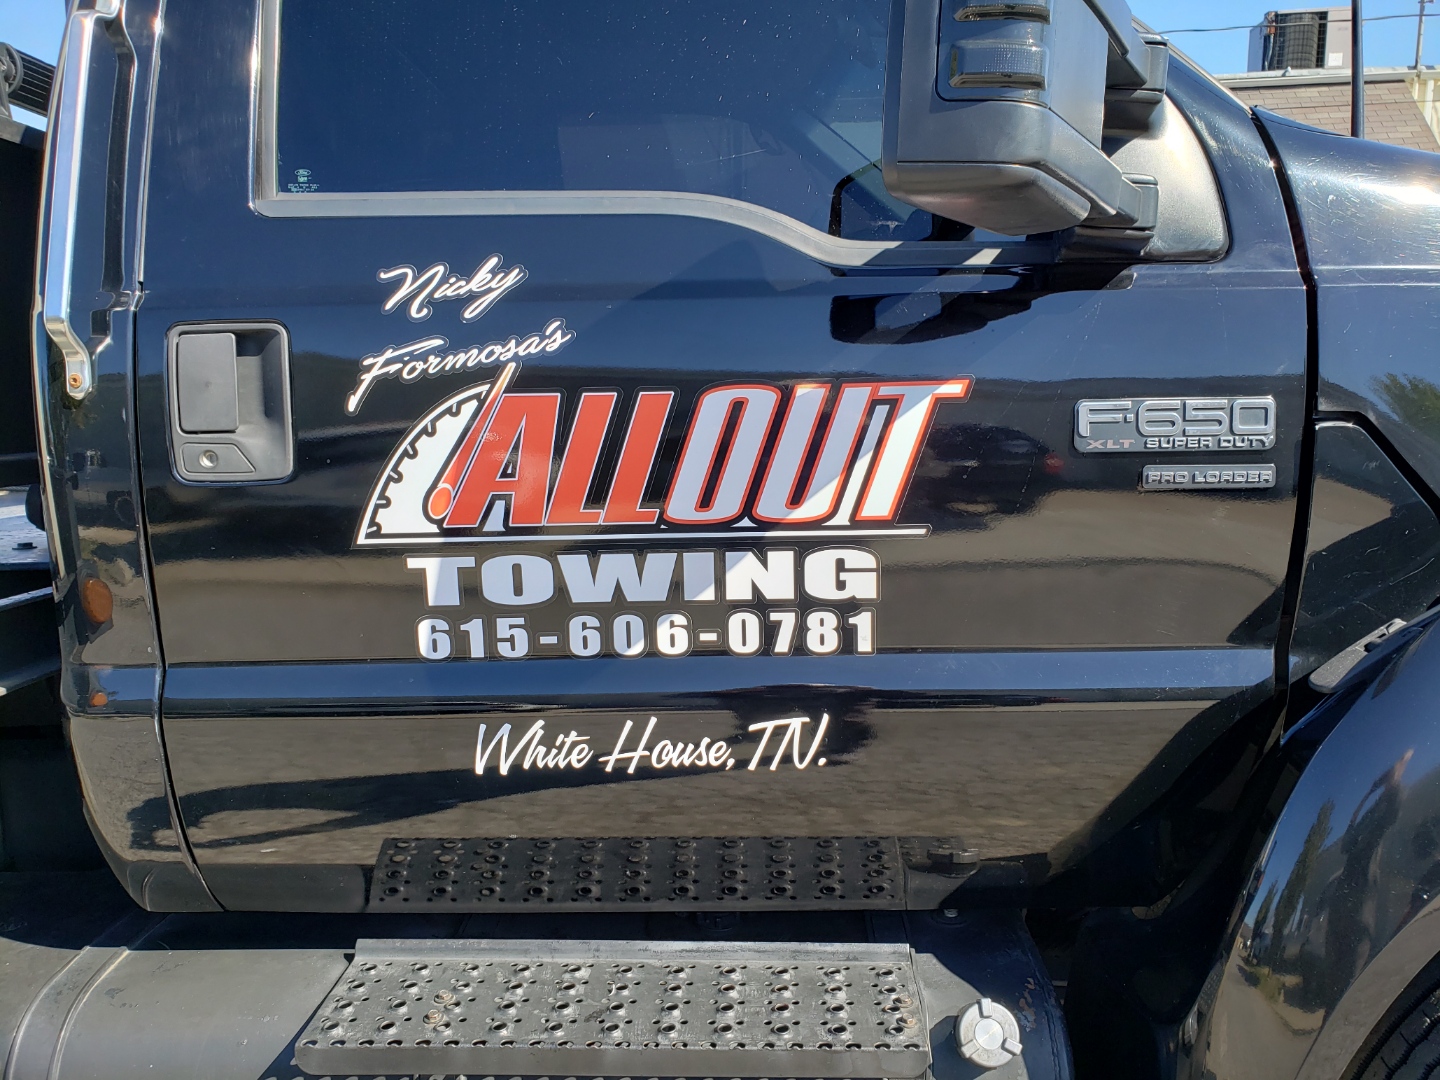 Nicky Formosa All Out Towing LLC